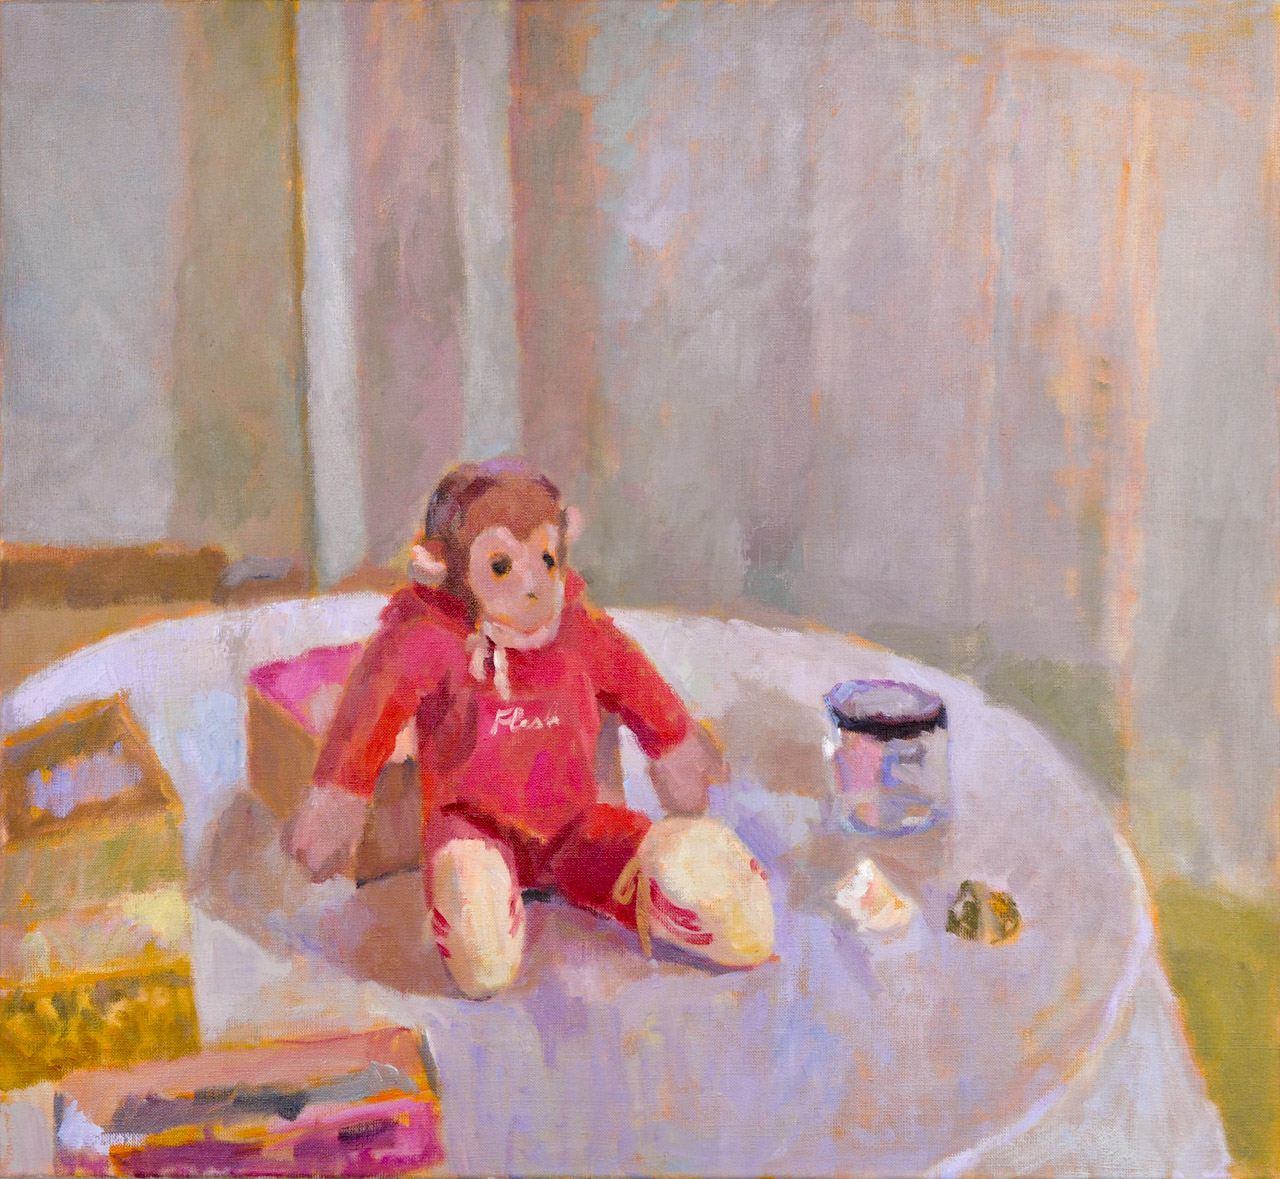 How Gwen John inspired me to paint Flash the Toy Monkey